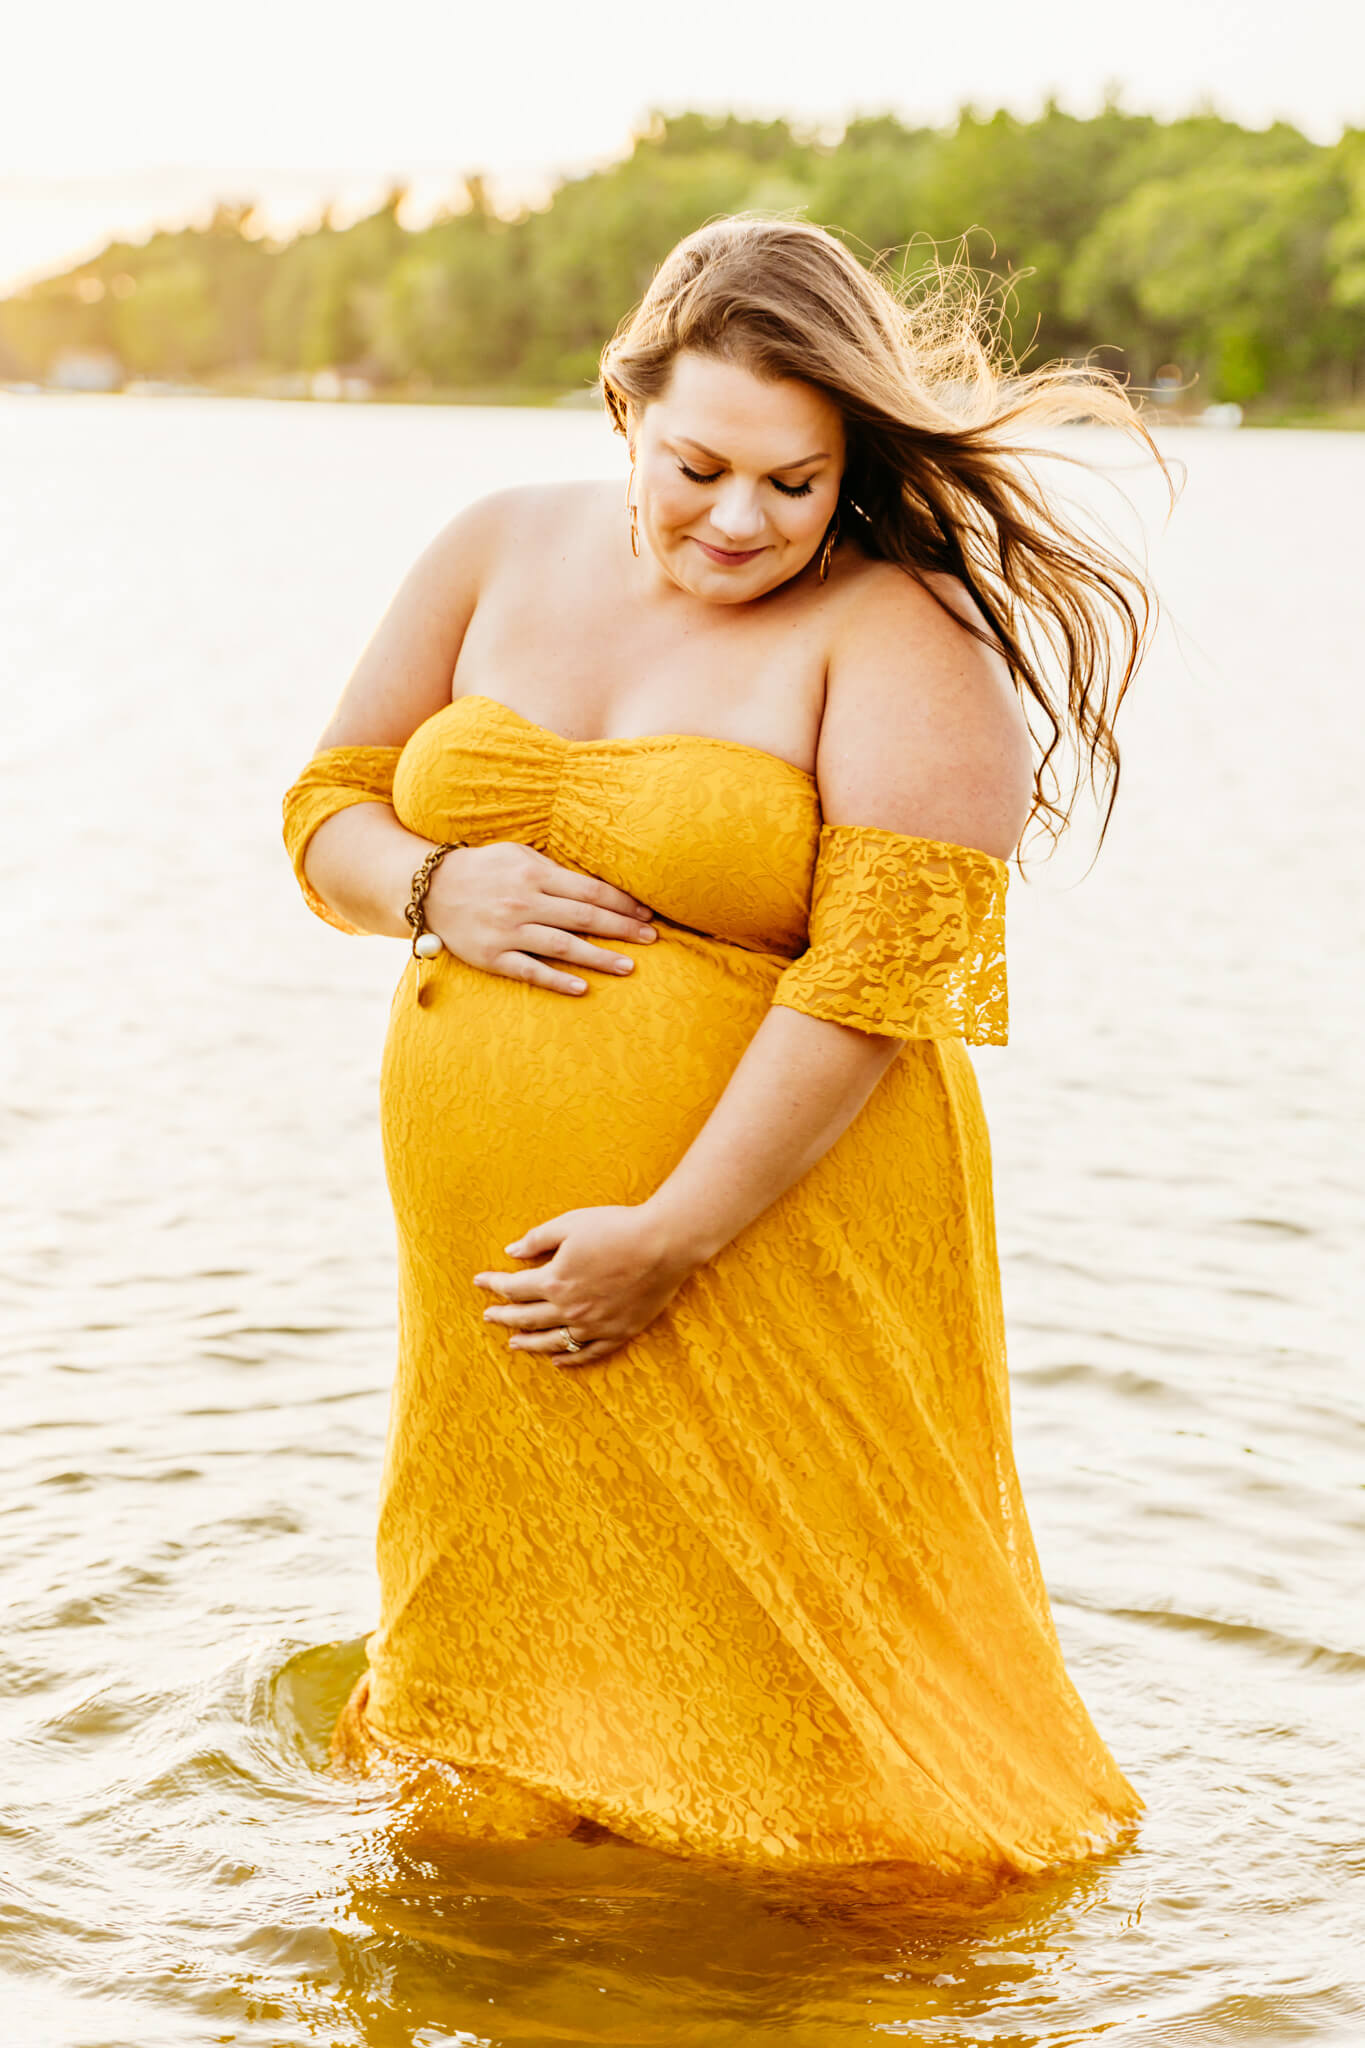 stunning expecting mother holding her baby bump as she looks down at her belly and the wind blows in her hair while standing in a lake near Green Bay